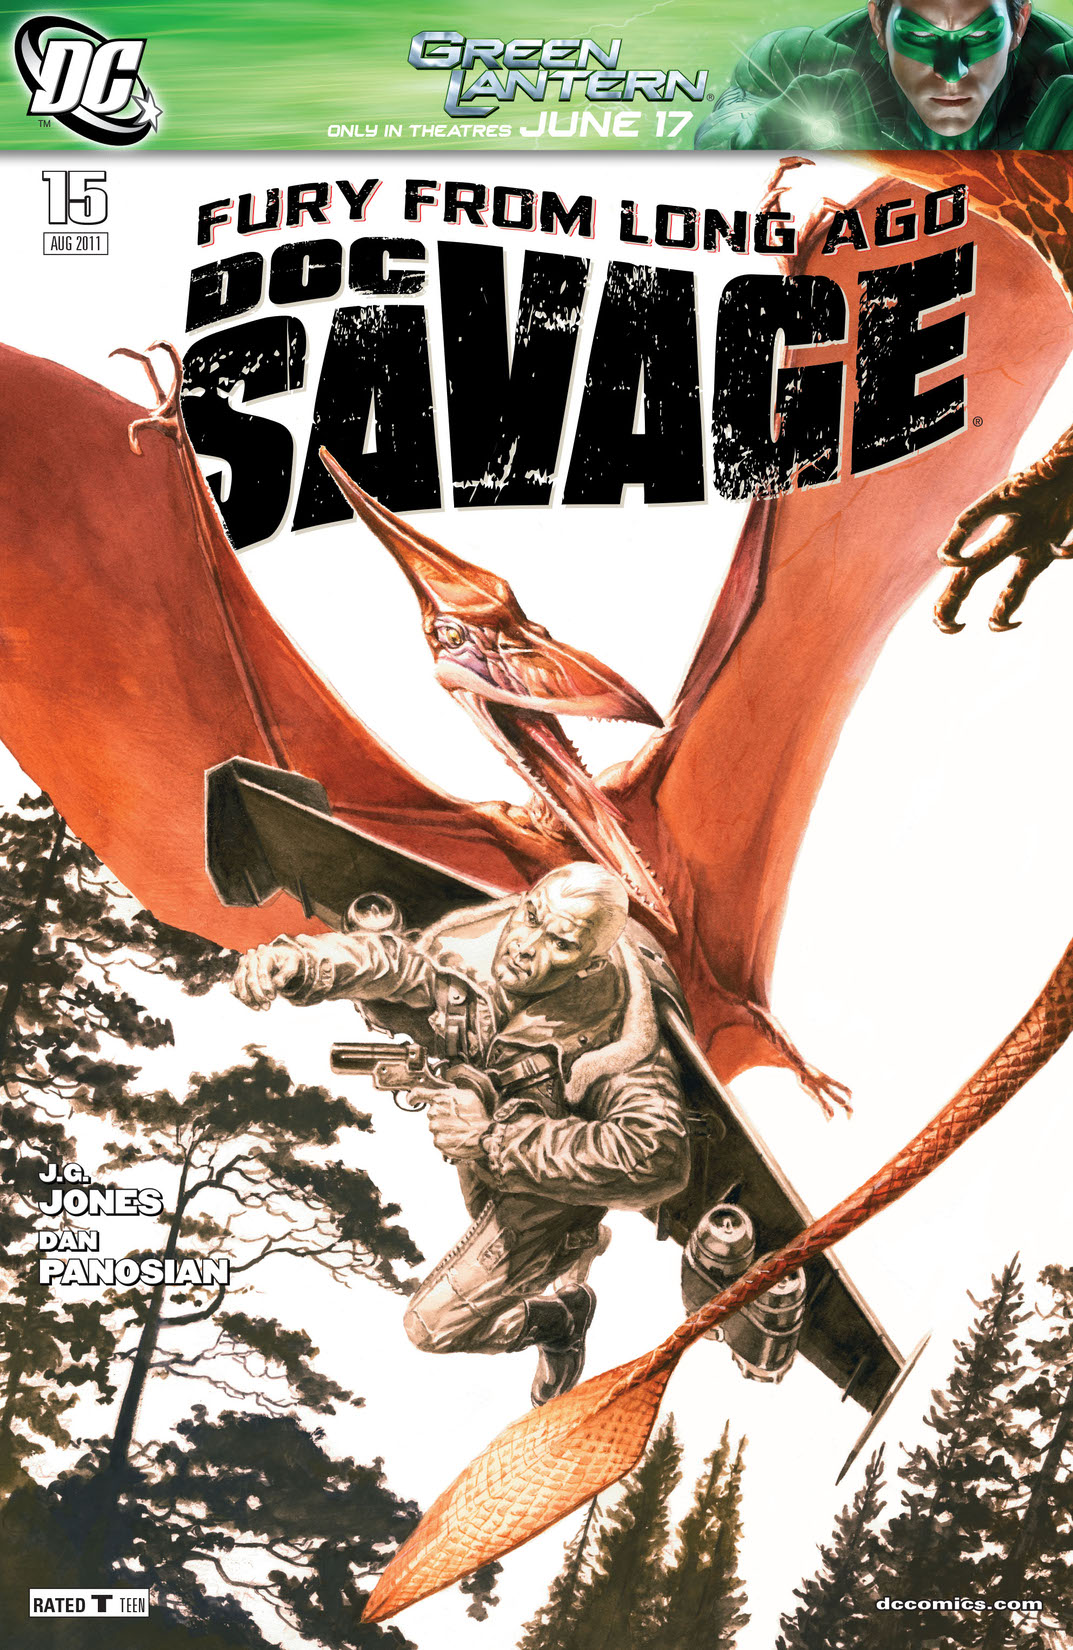 Doc Savage #15 preview images